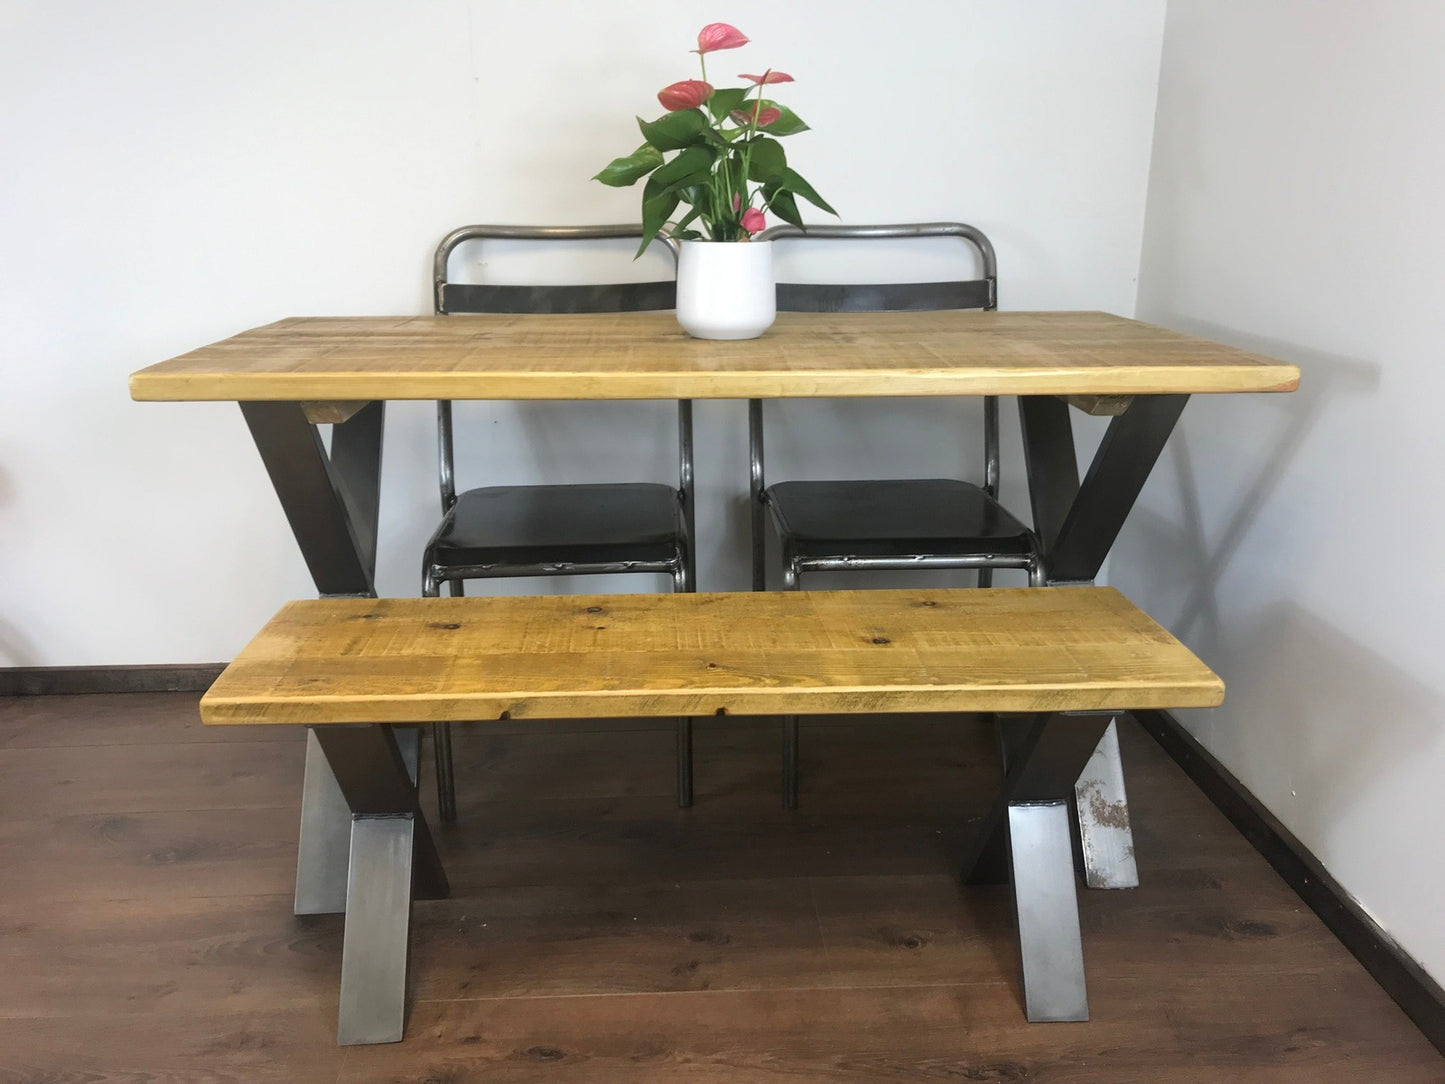 Rustic X-Leg Solid Wood Dining Table Set with Matching Bench Options